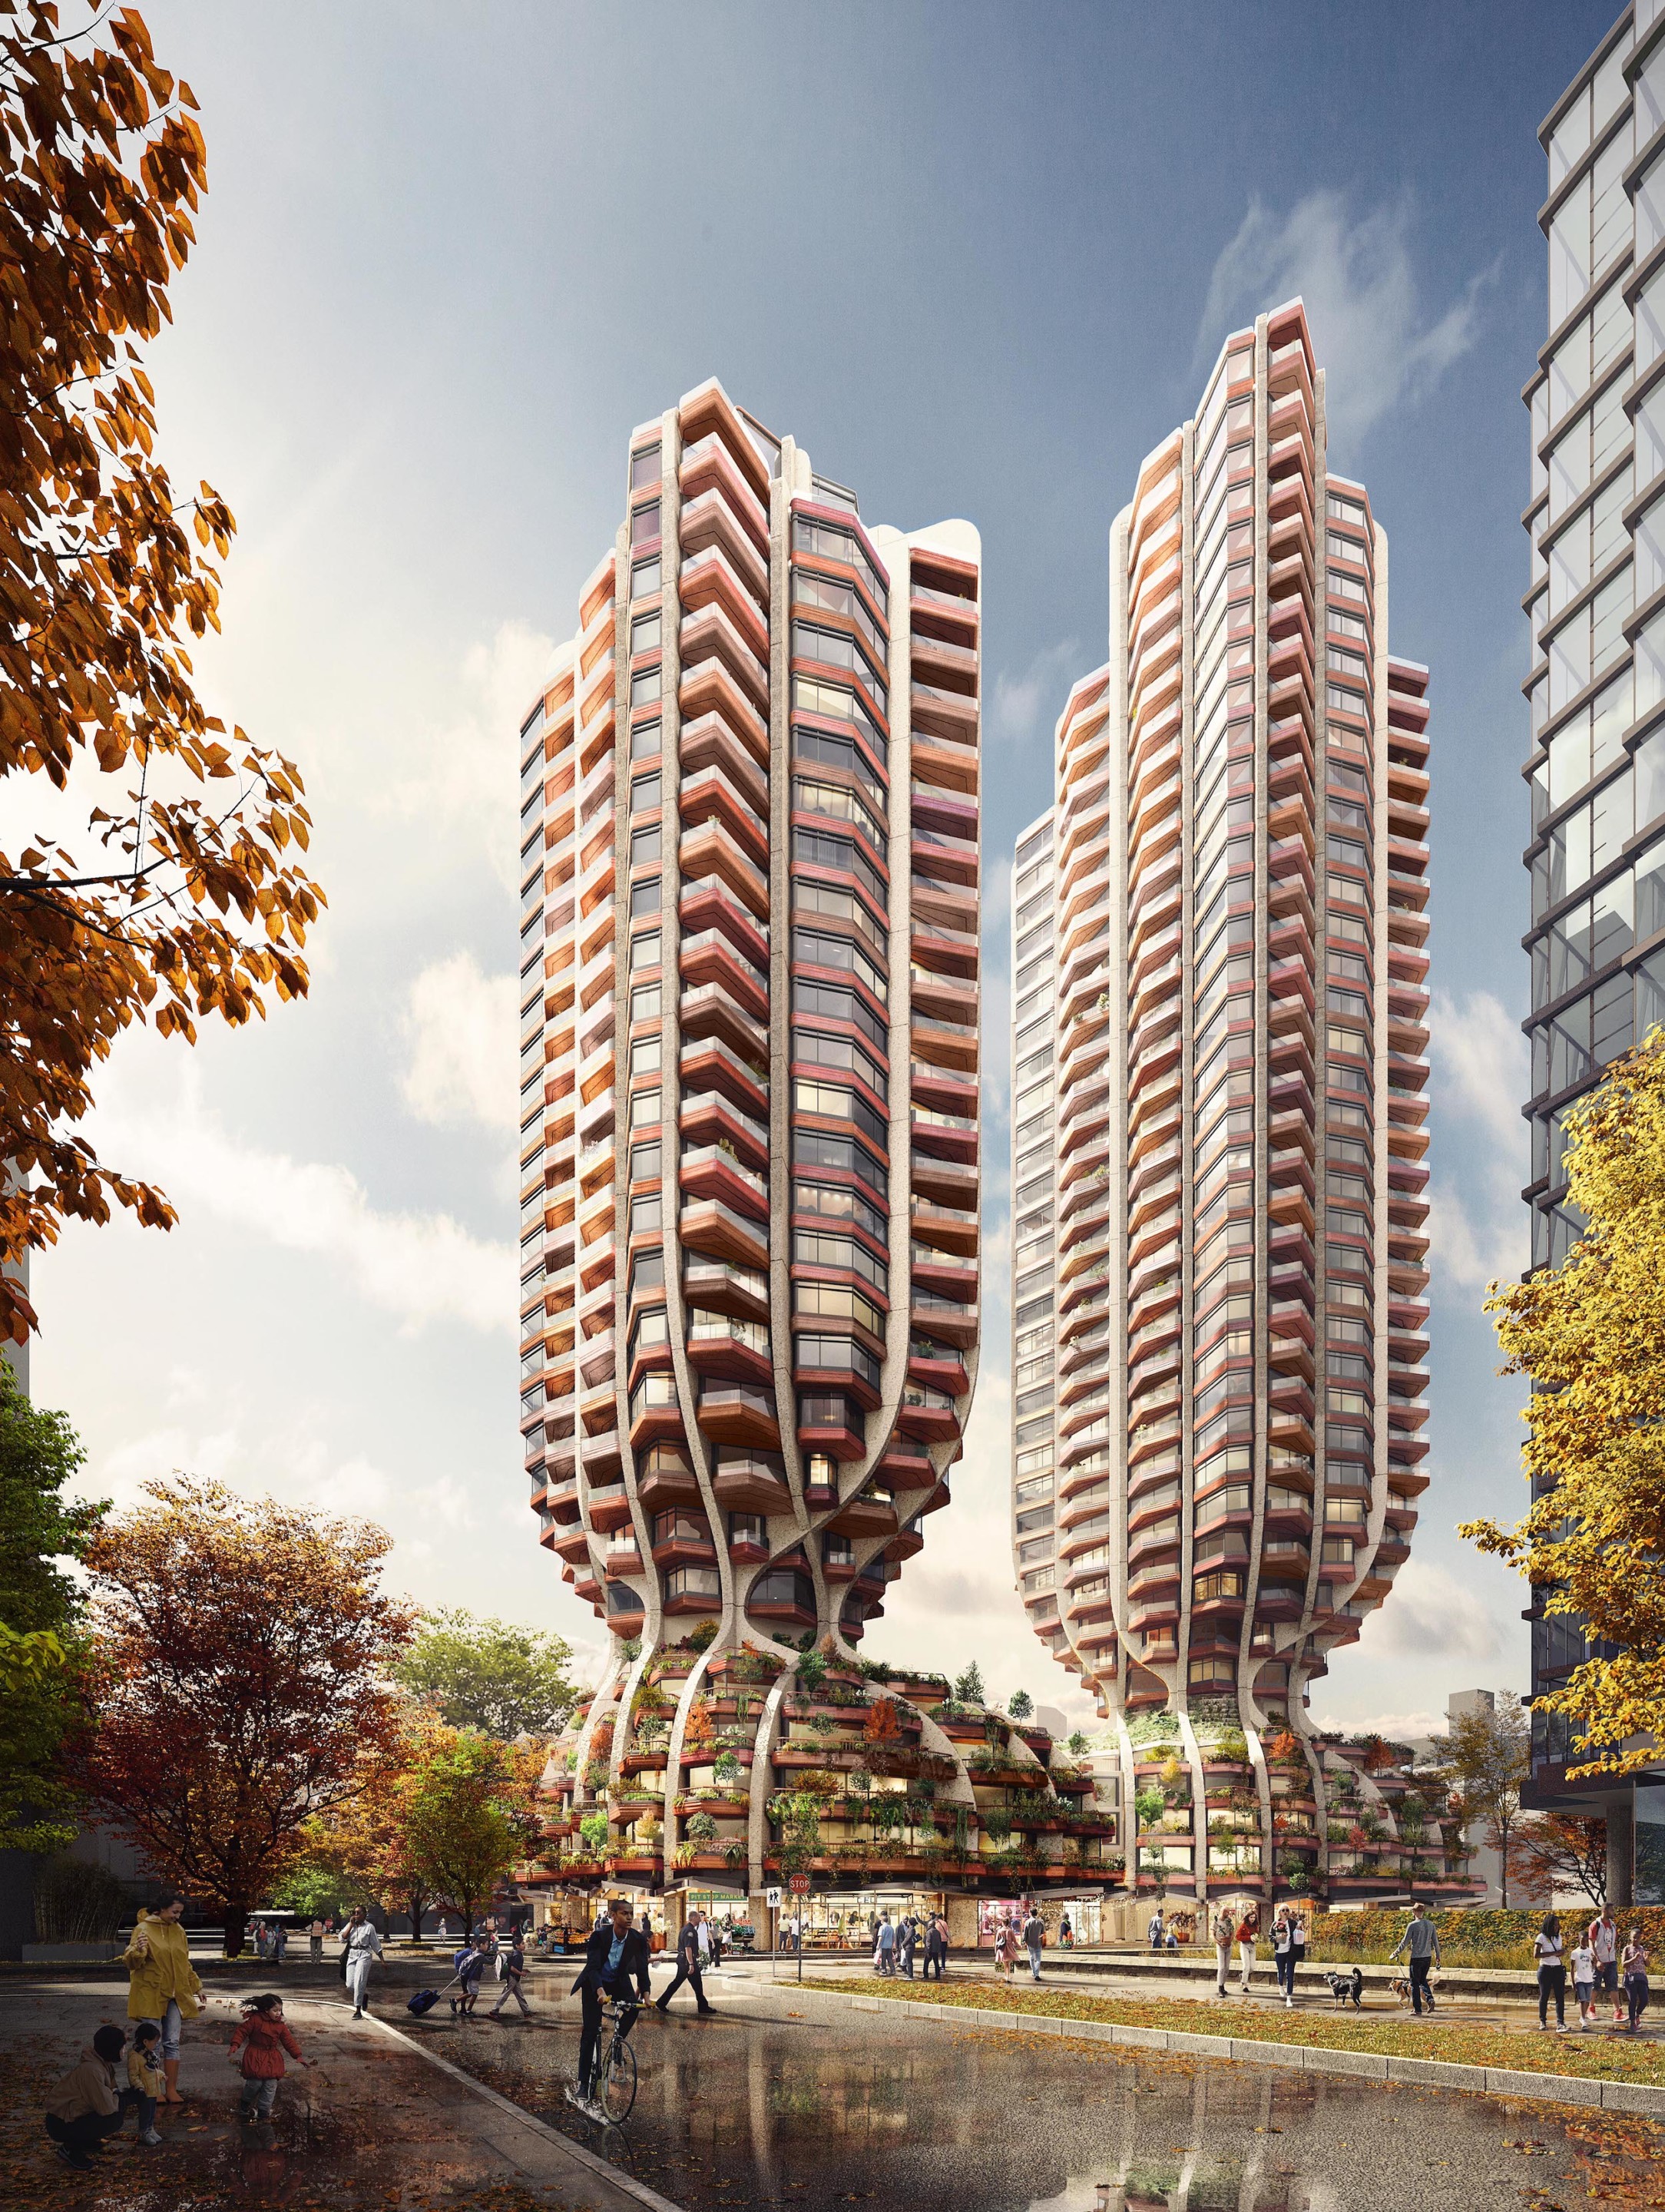 illustration of two twisty-tree-like apartment towers